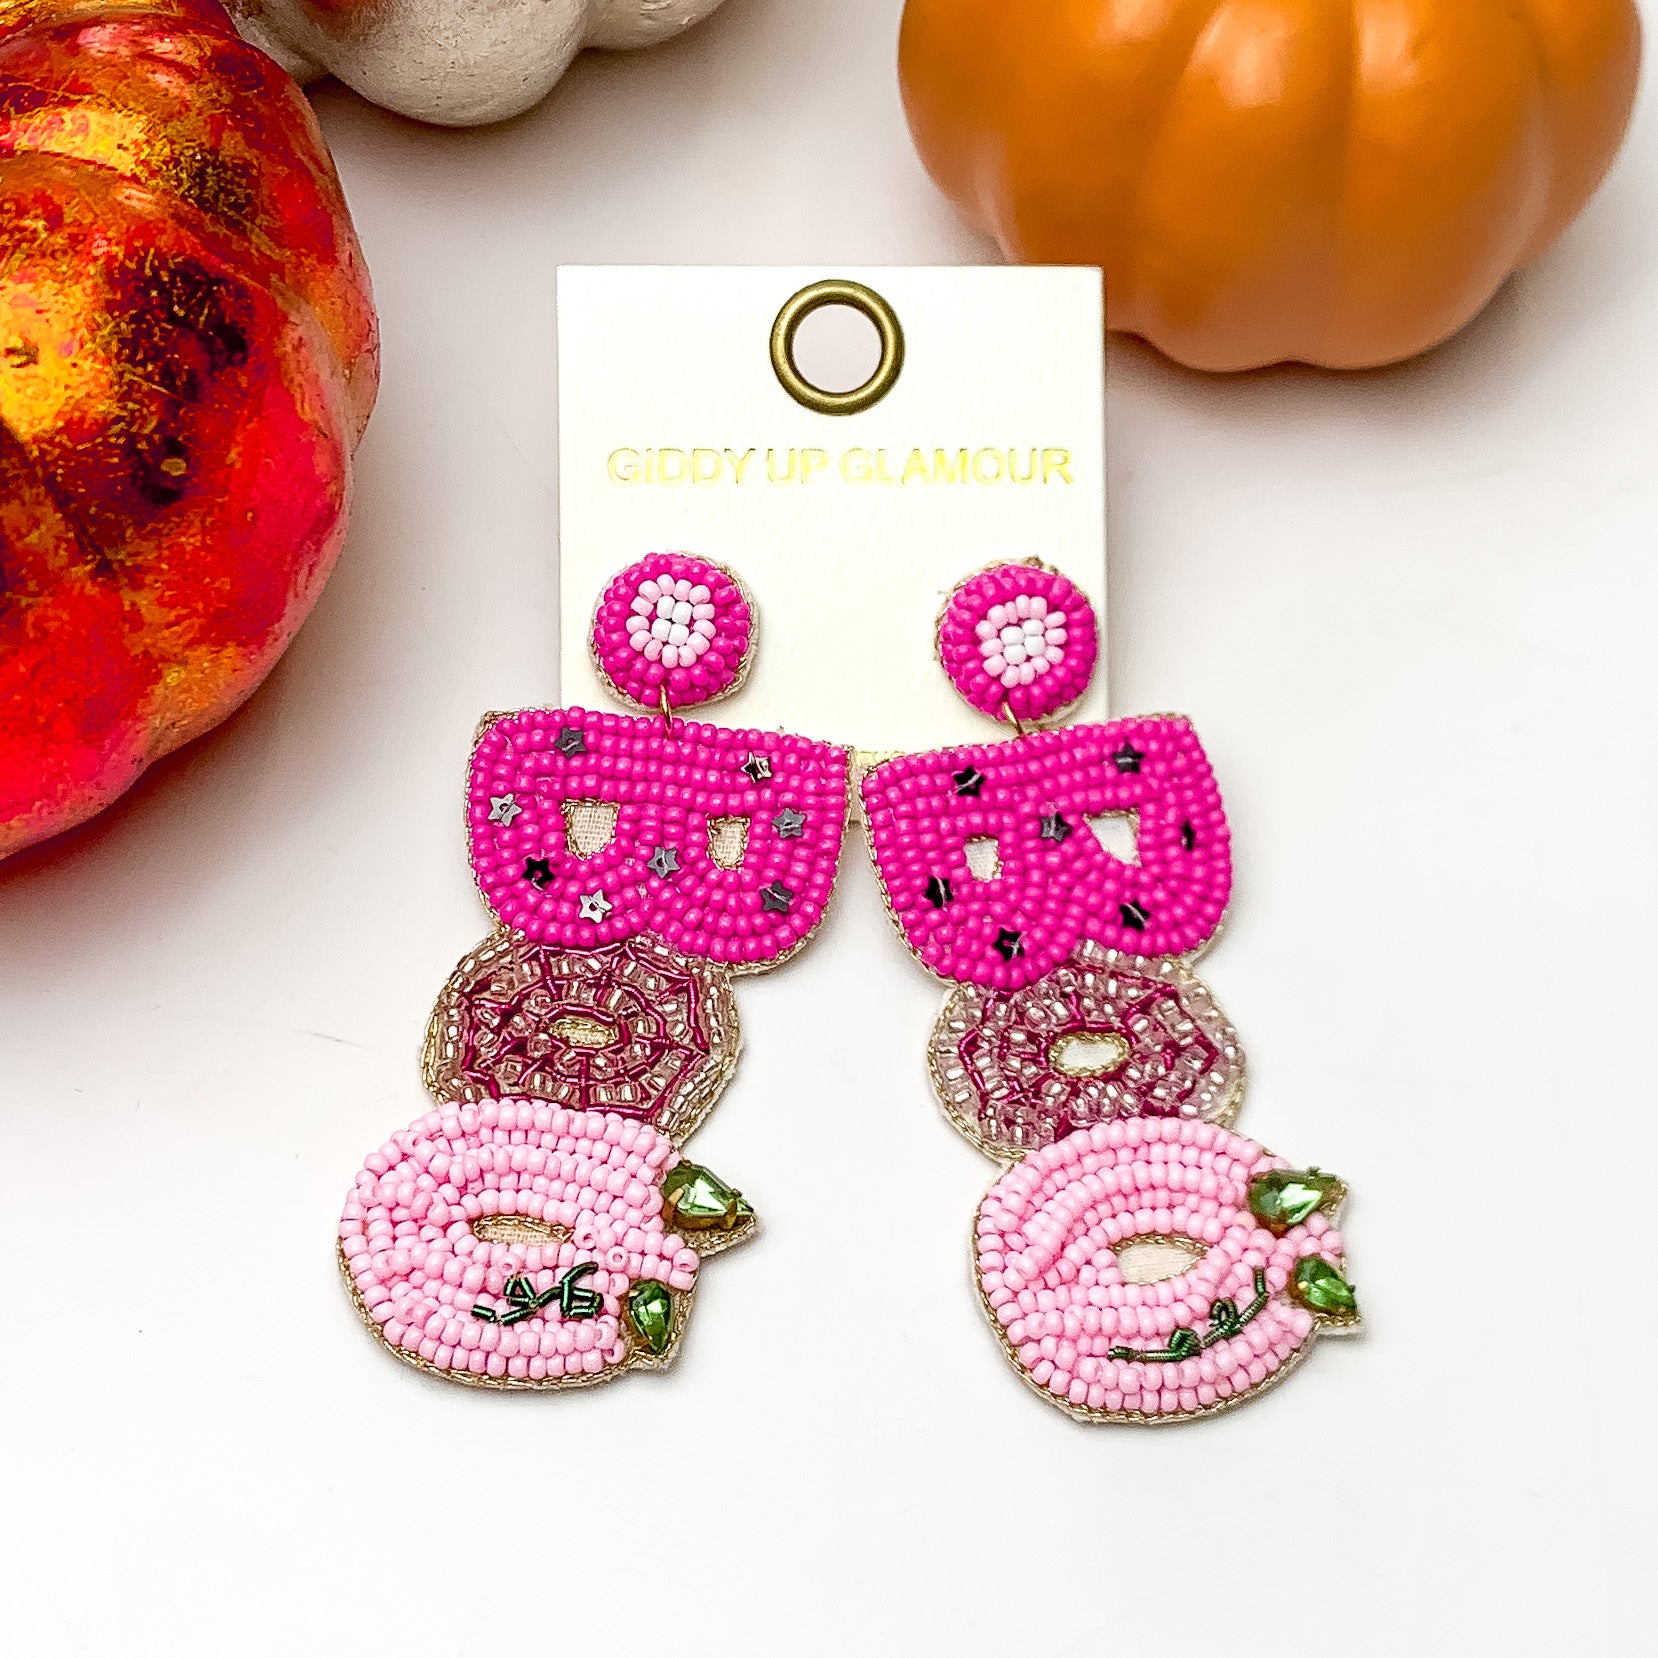 BOO Beaded Earrings in a Fuchsia Pink Mix - Giddy Up Glamour Boutique